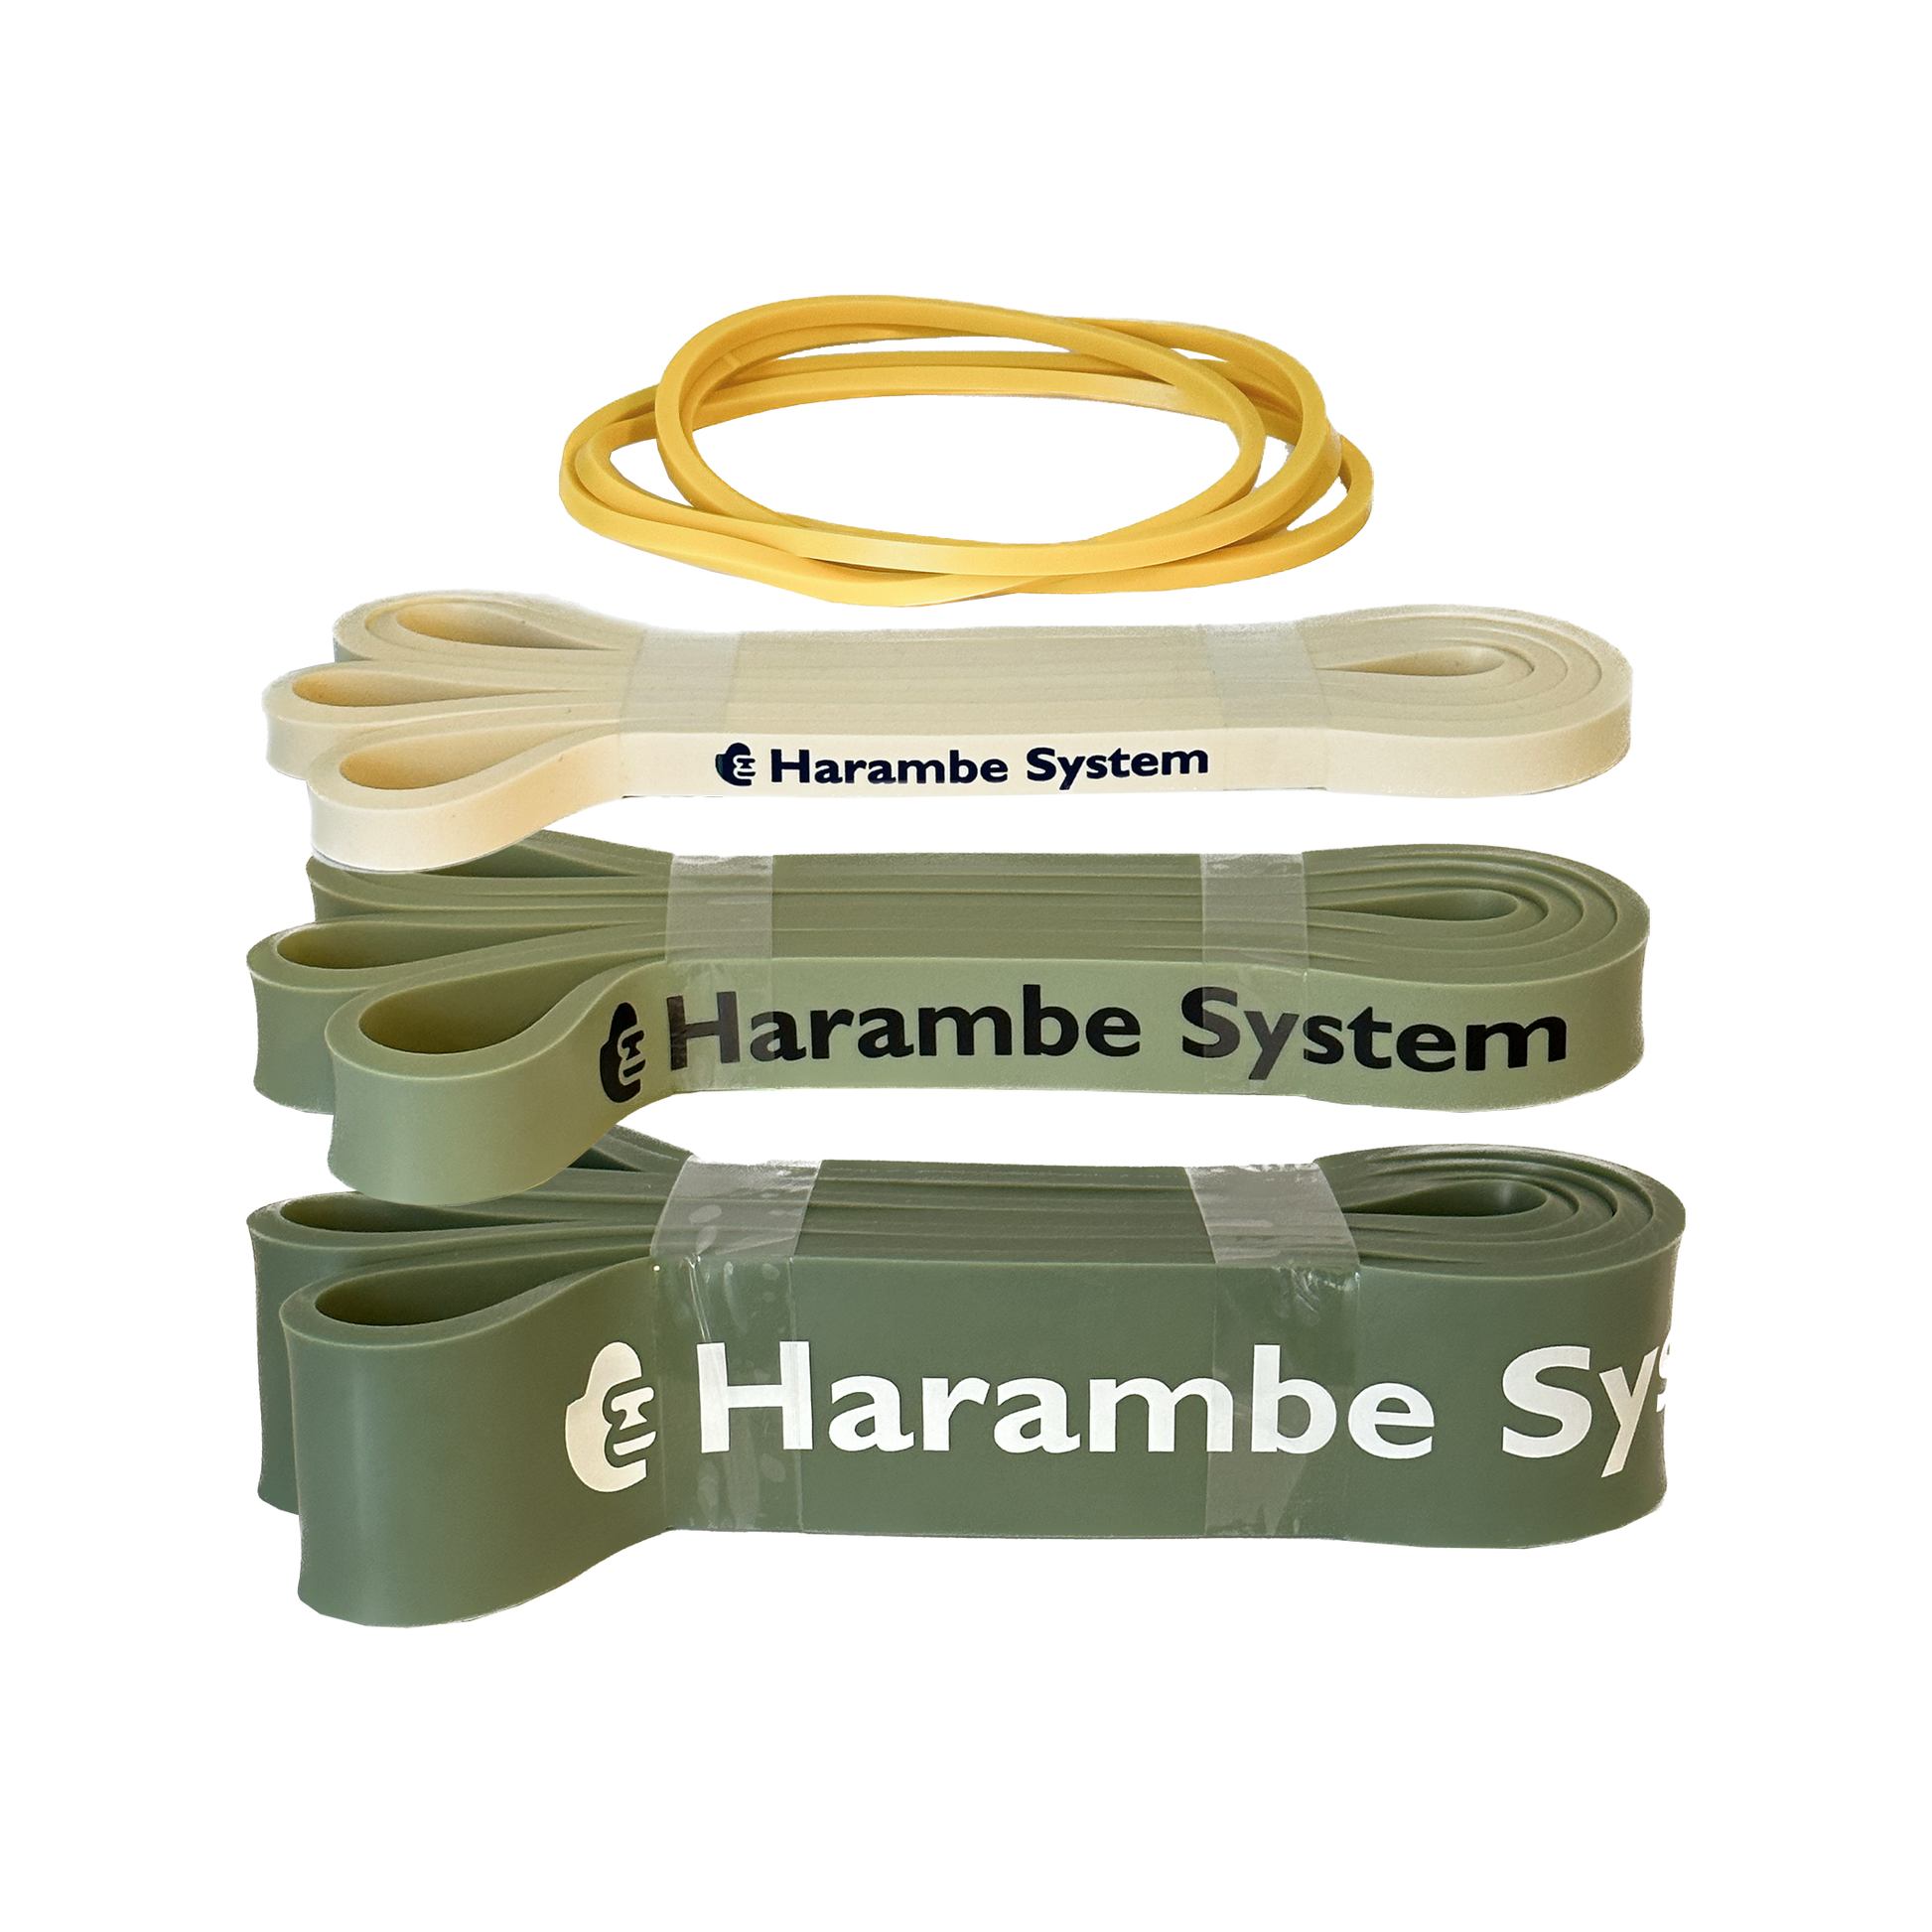 Picture of all four bands in the bundle. Colors are yellow, white, light green, and dark green.